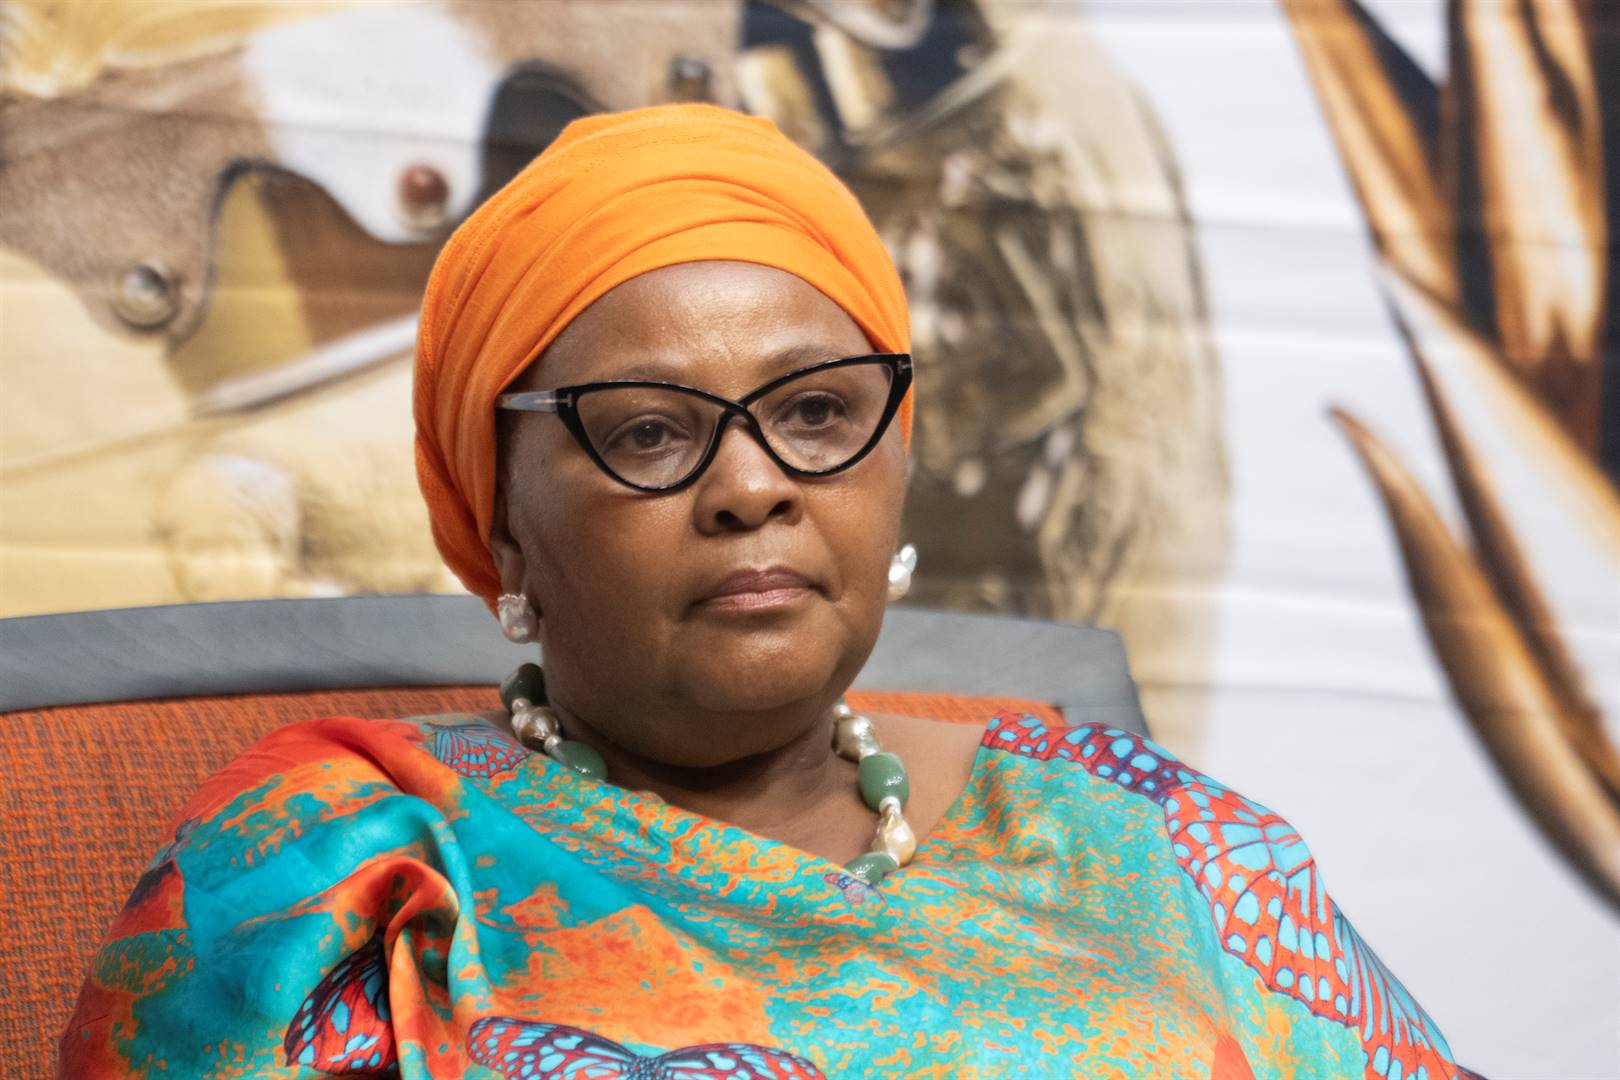 National Assembly Speaker Nosiviwe Mapisa-Nqakula is facing pressure to resign from office following allegations that she solicited and received bribes amounting to R2.3 million from a contractor to the defence force, during her tenure as defence minister.